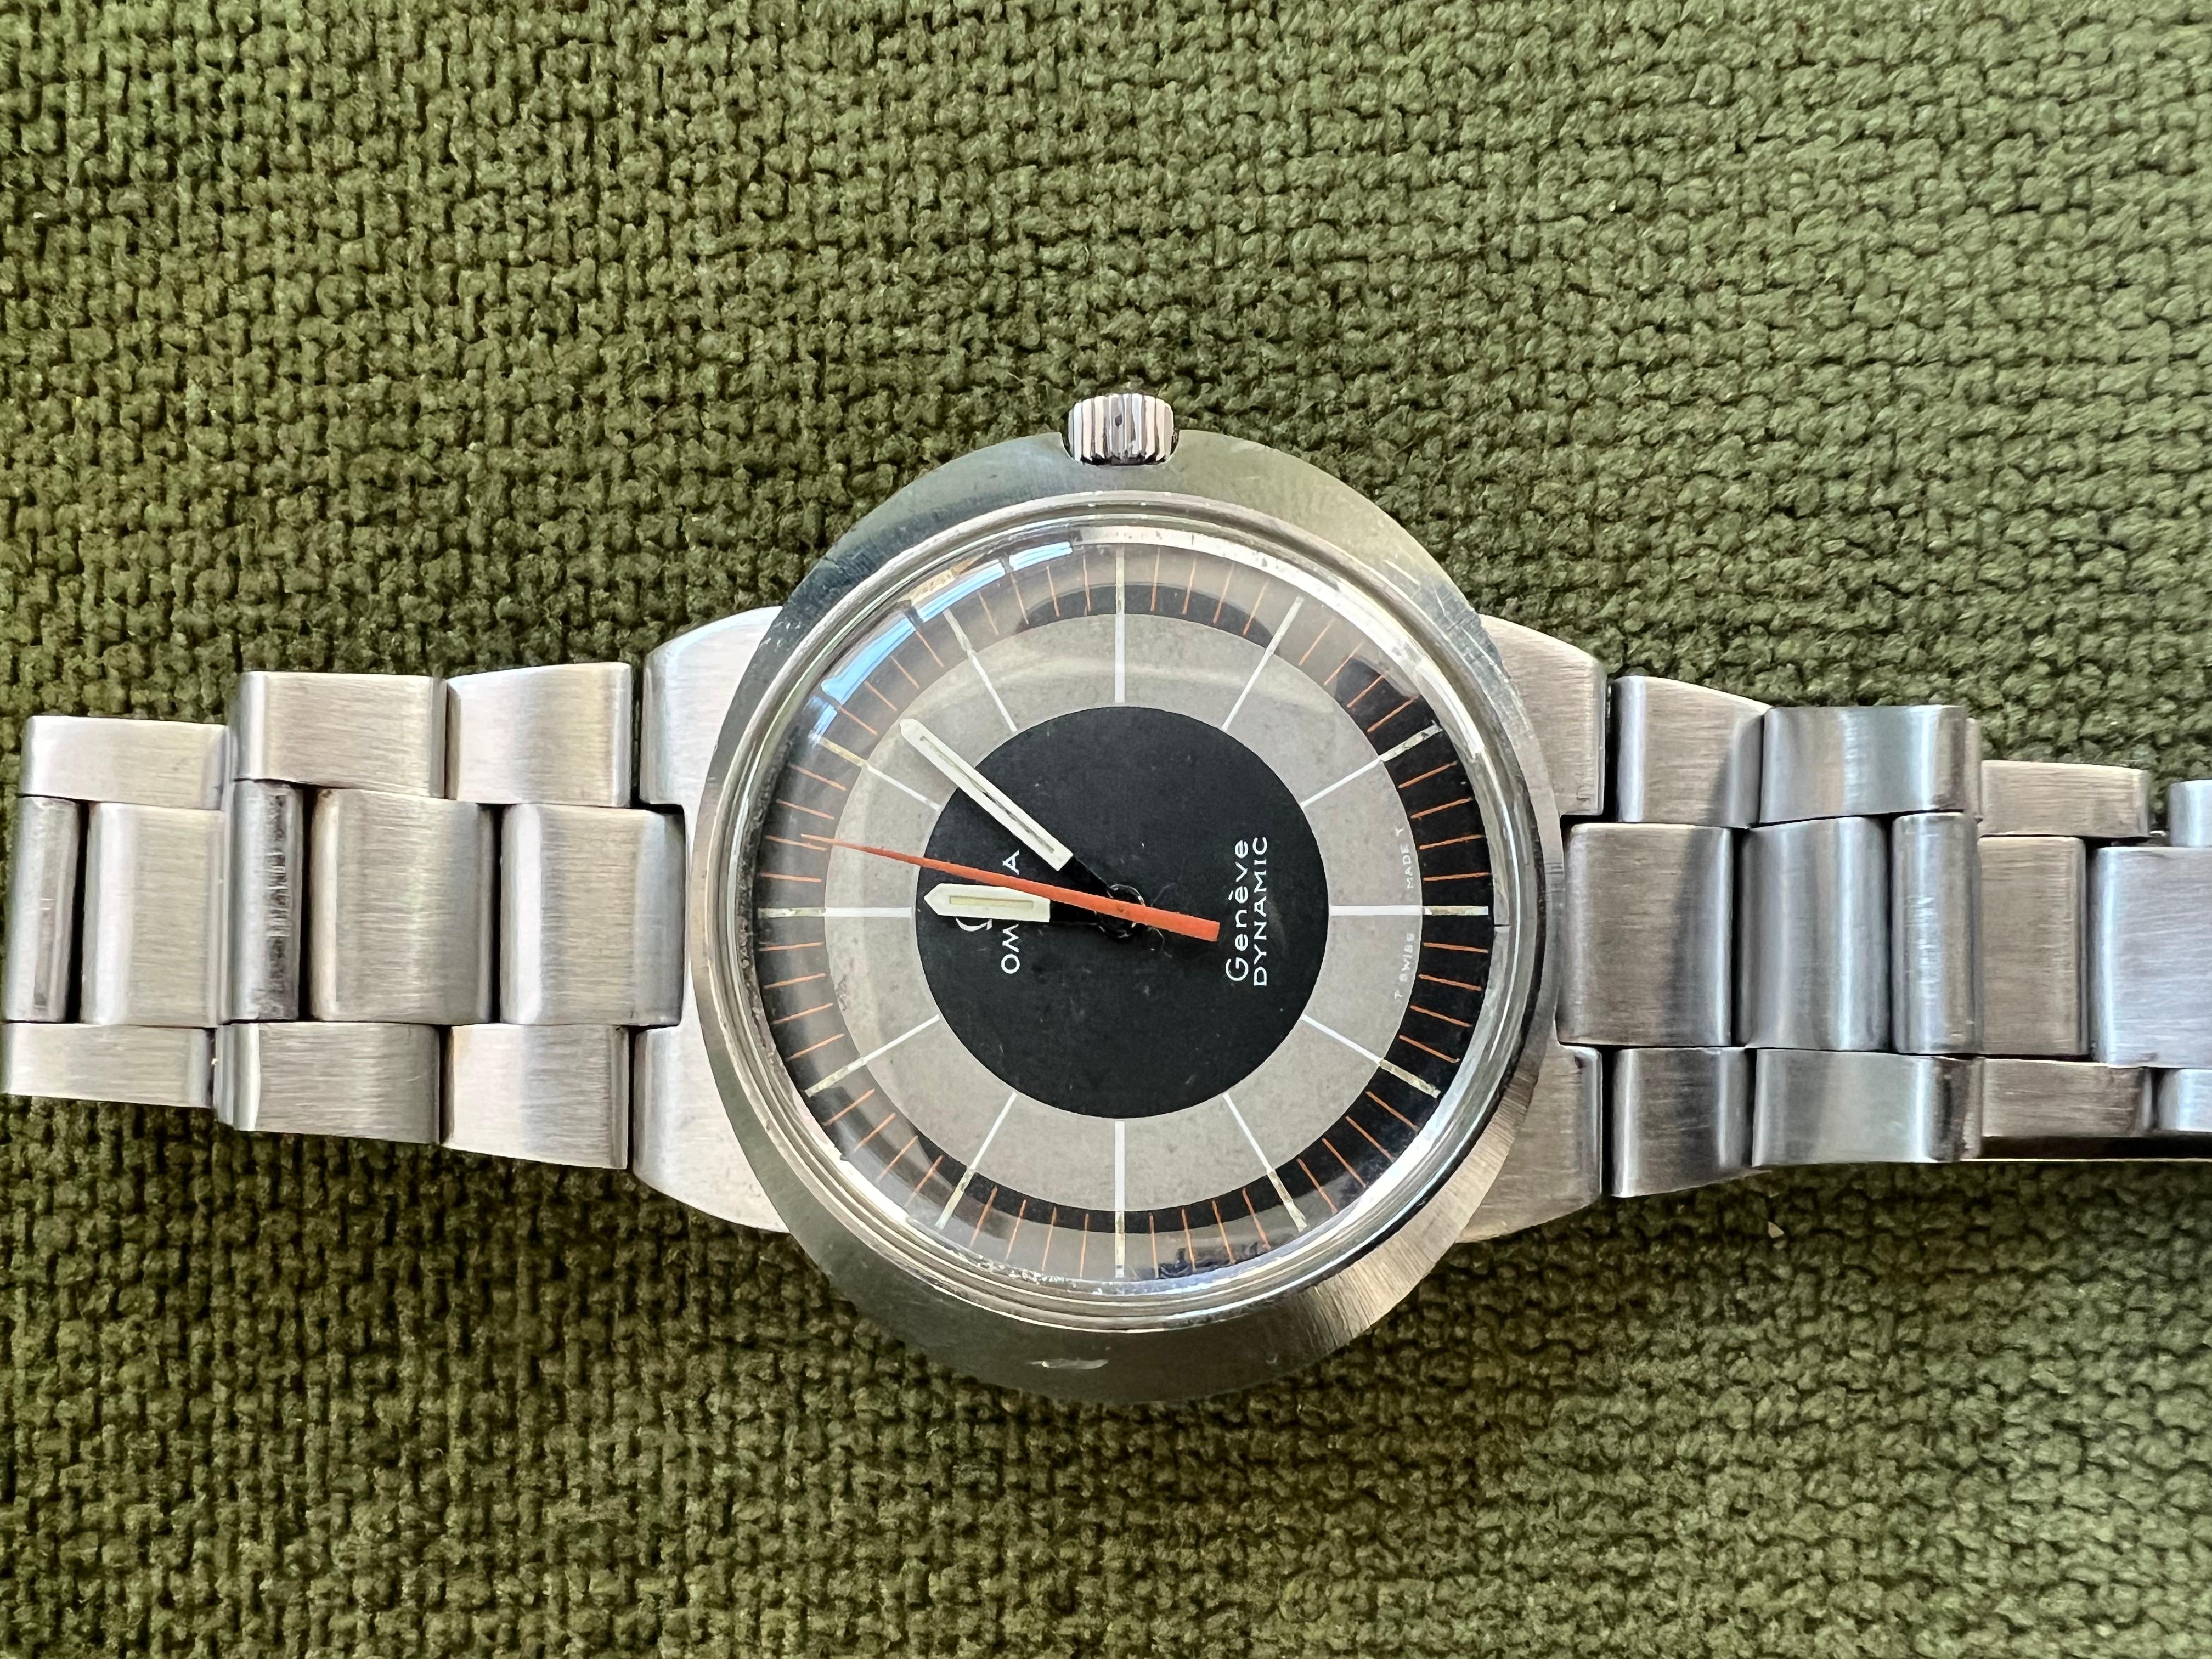 Omega Dynamic Vintage c. 1970s Watch W/ Tricolored Dial 4